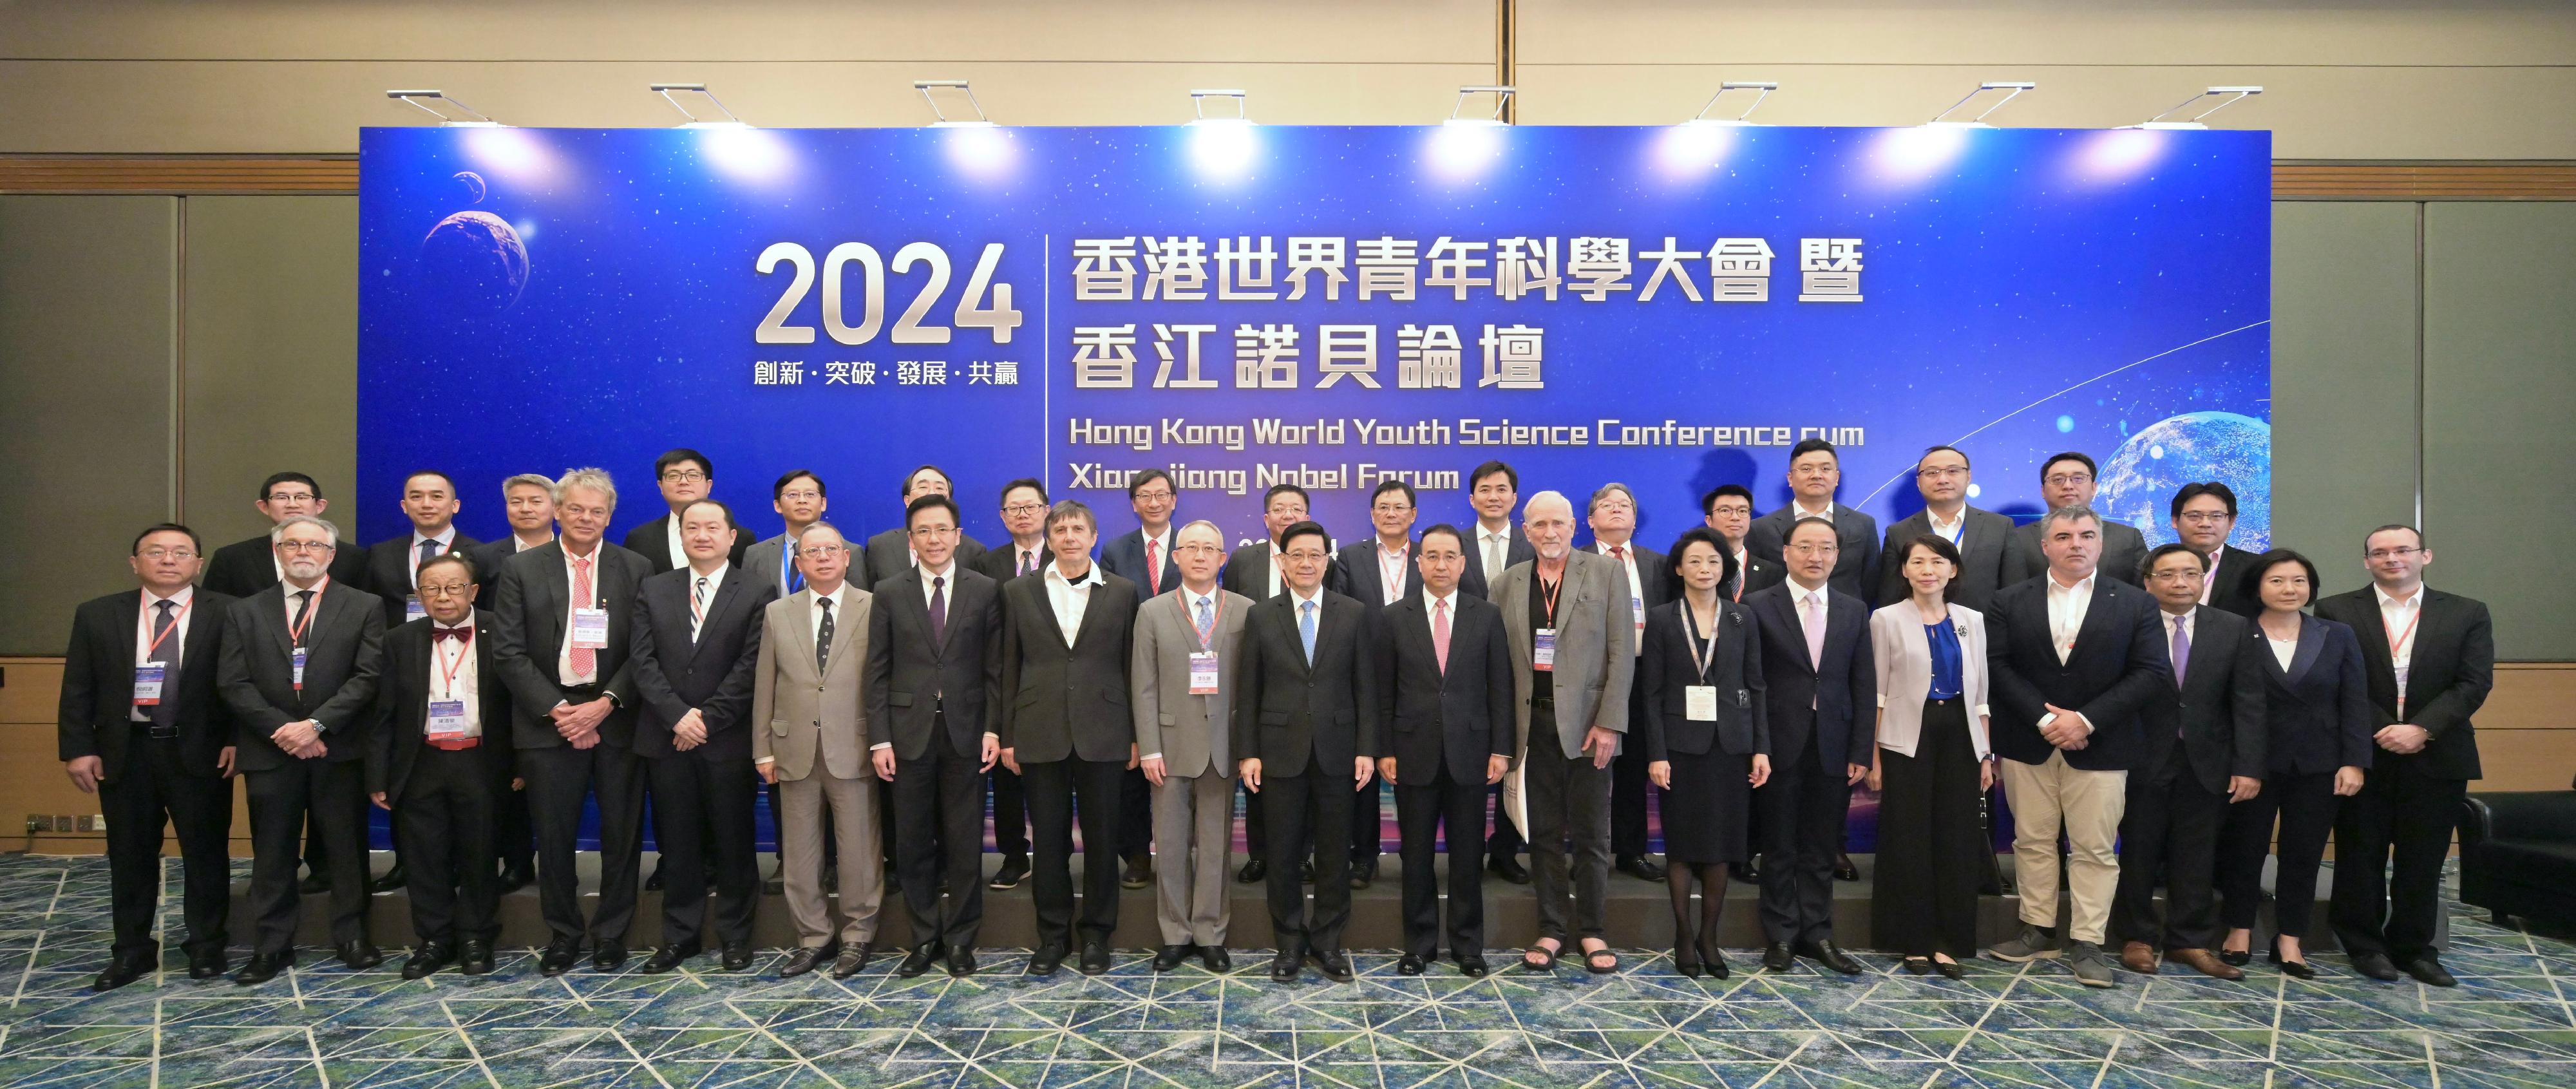 The Chief Executive, Mr John Lee, today (April 13) attended the opening ceremony of Hong Kong World Youth Science Conference and the Xiangjiang Nobel Forum 2024. Photo shows Mr Lee (front row, centre); Deputy Director of the Liaison Office of the Central People's Government in the Hong Kong Special Administrative Region (HKSAR) Mr Liu Guangyuan (front row, ninth right); Deputy Commissioner of the Office of the Commissioner of the Ministry of Foreign Affairs of the People's Republic of China in the HKSAR Mr Li Yongsheng (front row, ninth left); the Secretary for Innovation, Technology and Industry, Professor Sun Dong (front row, seventh left); the President of the Hong Kong Alumni Association of Beijing Universities, Ms Li Ran (front row, seventh right); other guests and laureates of the Nobel Prize and the Turing Award, top-notch I&T (innovation and technology) talent and renowned scientists.